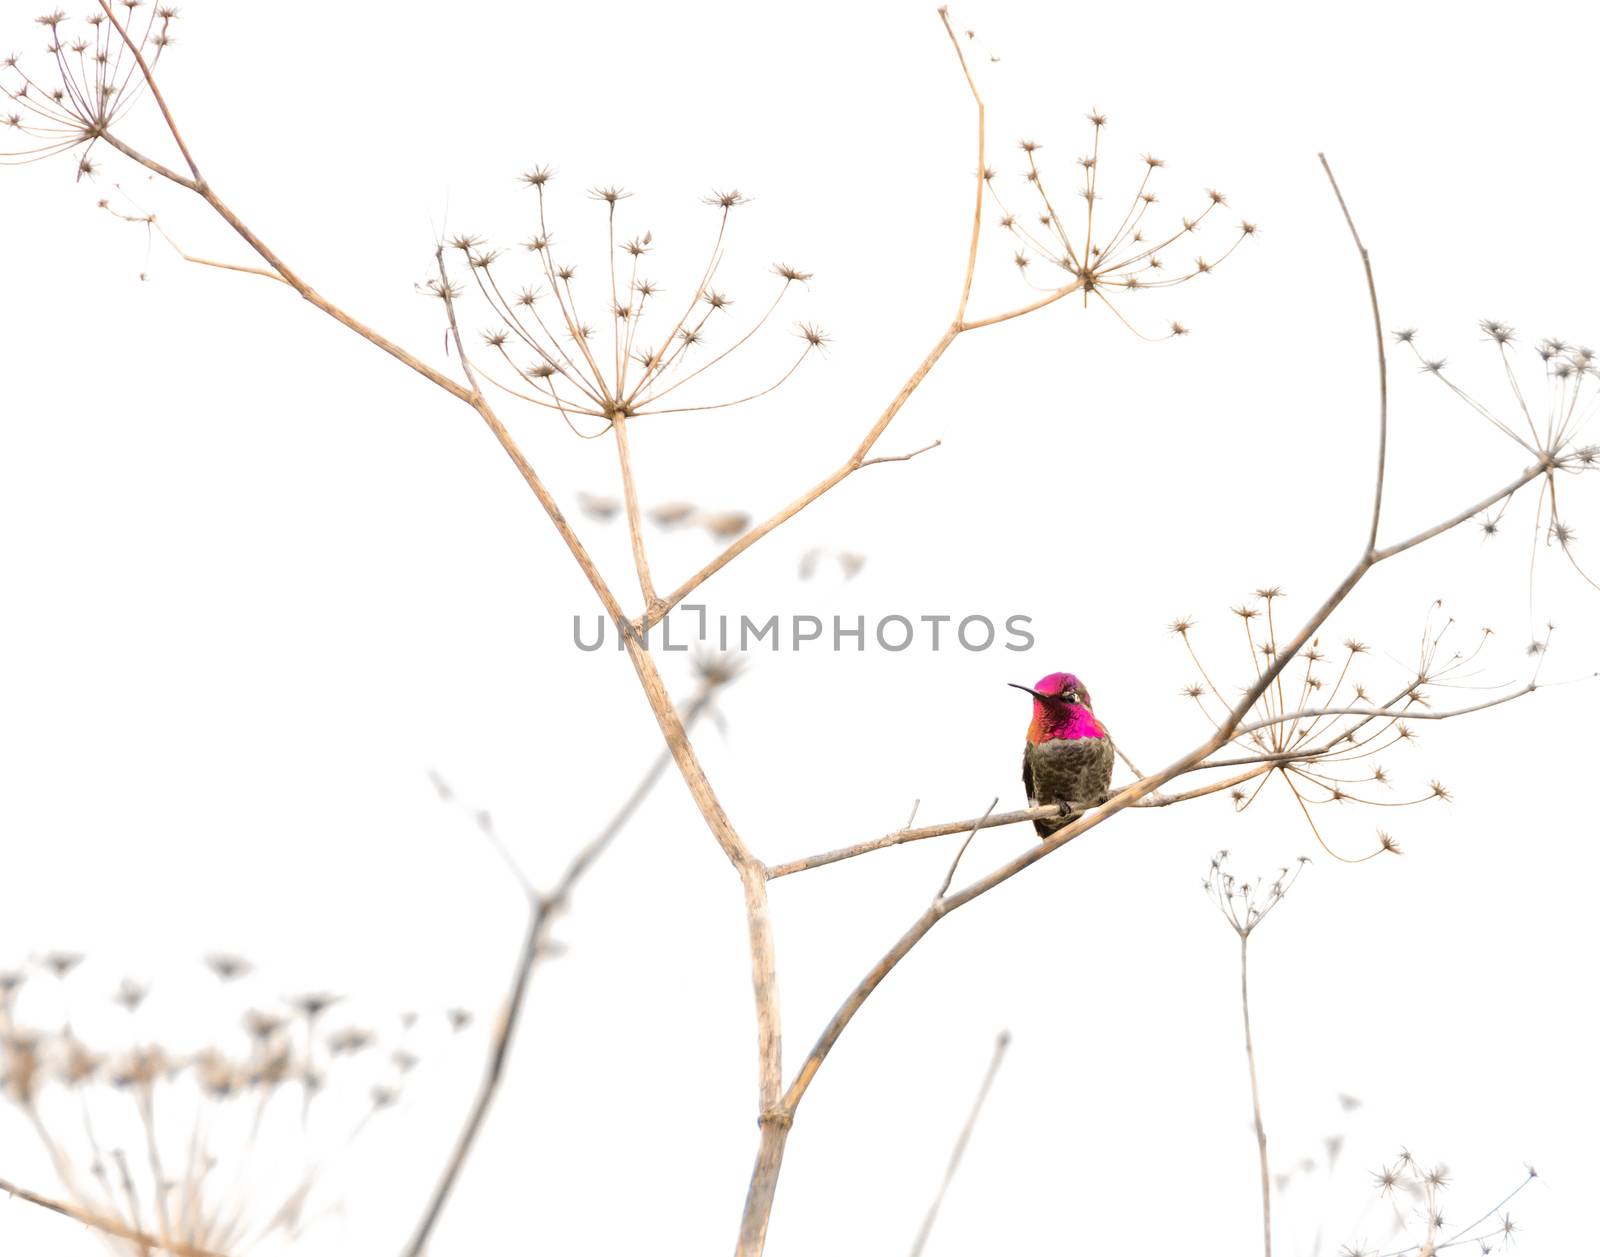 Hummingbird on a Dry Plant by whitechild